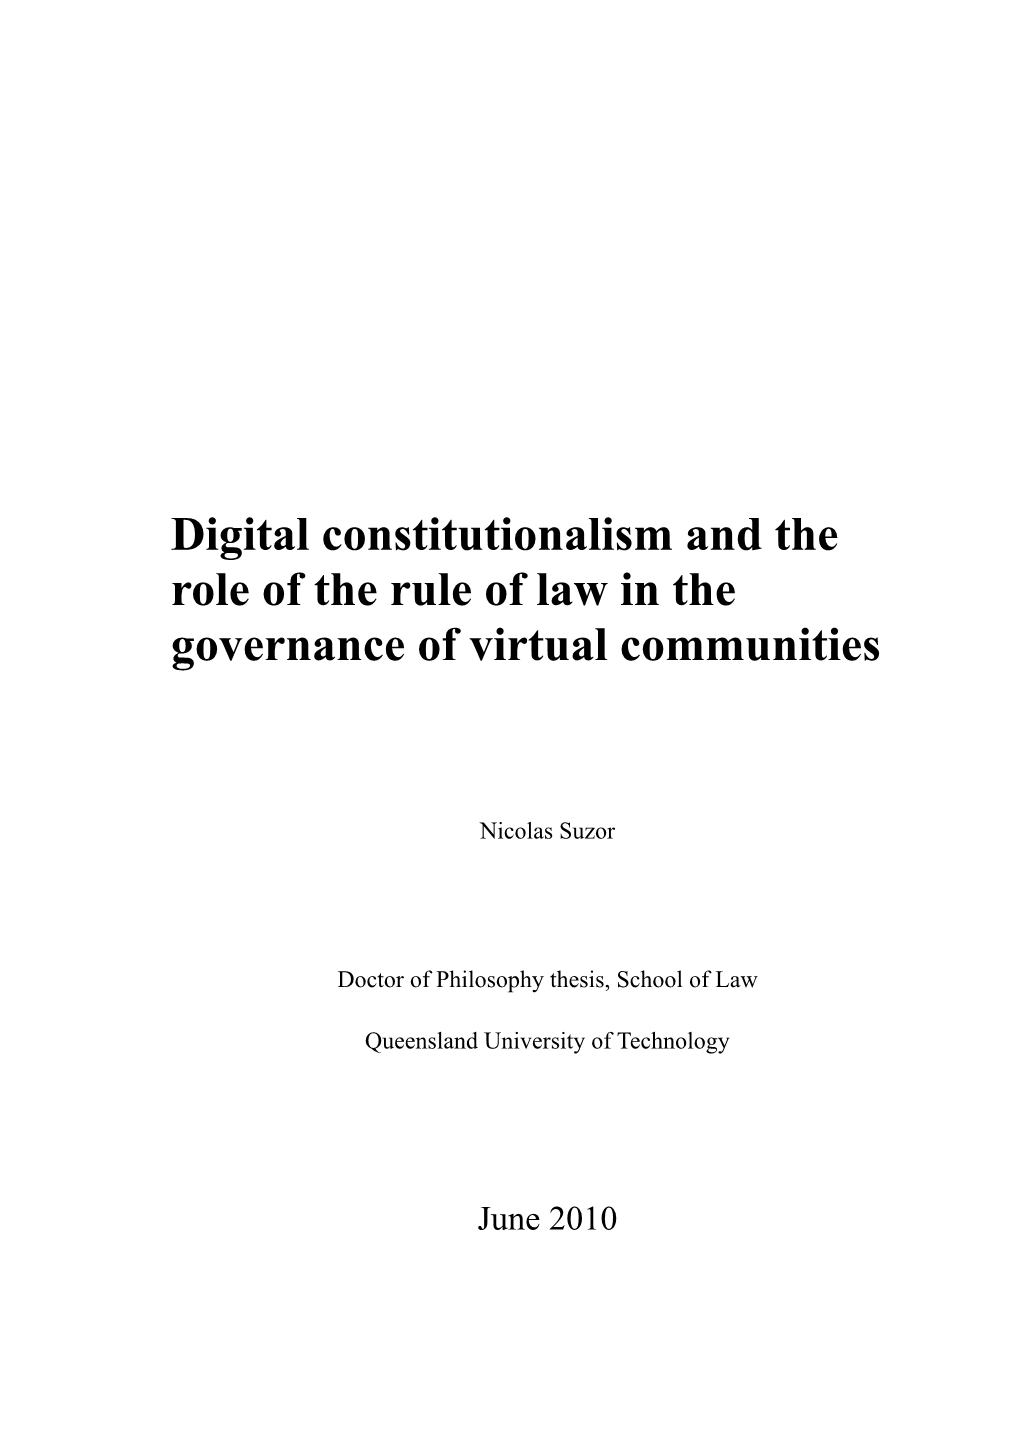 Digital Constitutionalism and the Role of the Rule of Law in the Governance of Virtual Communities